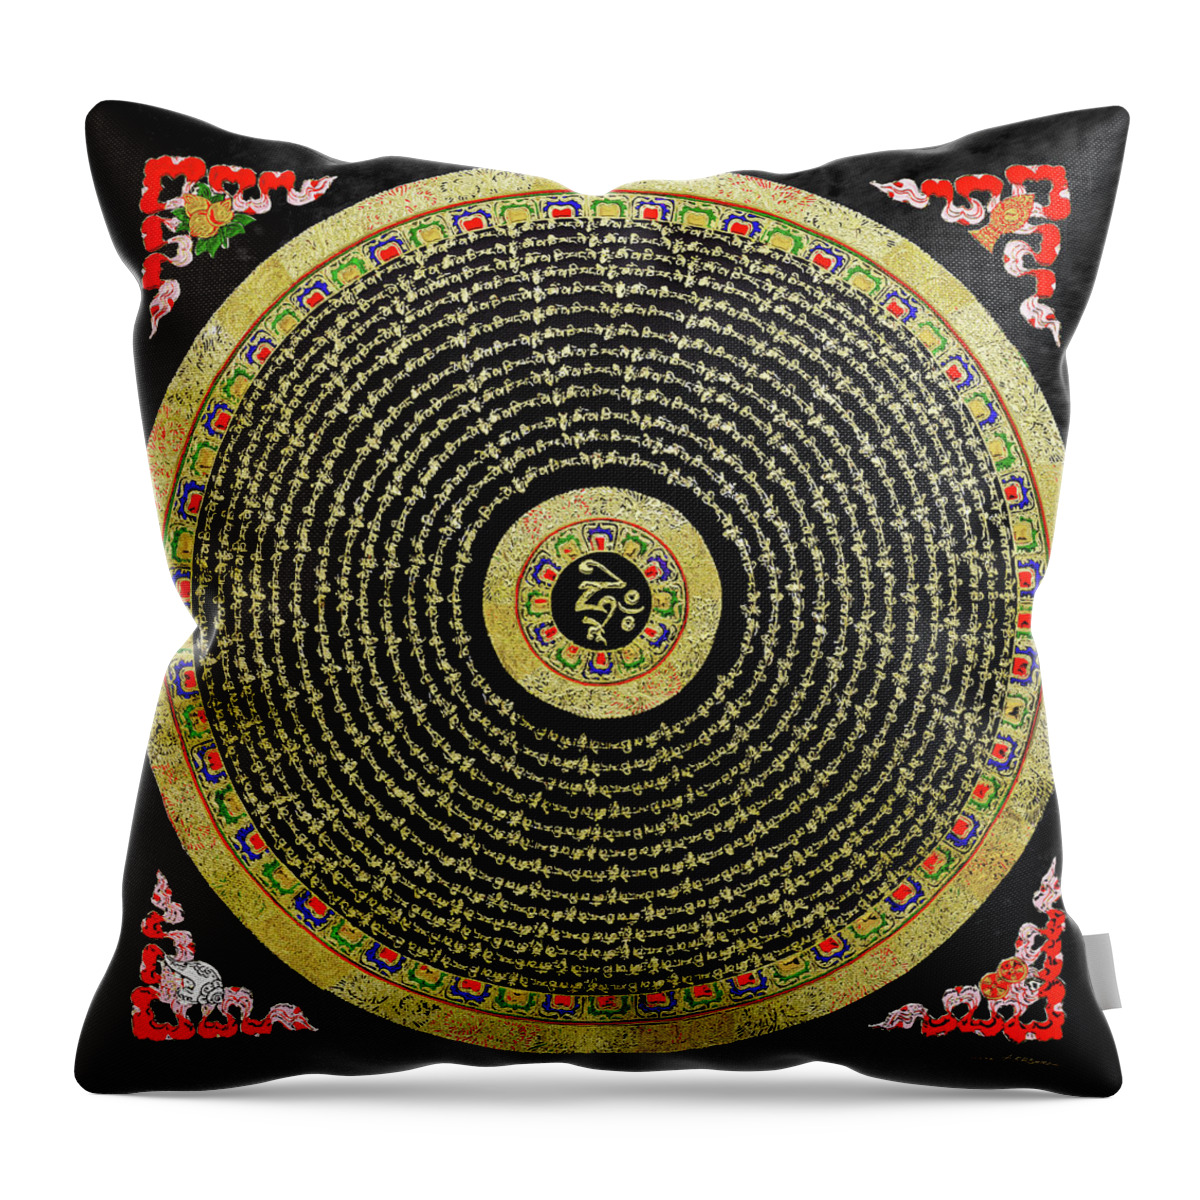 'treasures Of Tibet' Collection By Serge Averbukh Throw Pillow featuring the digital art Tibetan Thangka - Om Mandala with Syllable Mantra over Black by Serge Averbukh